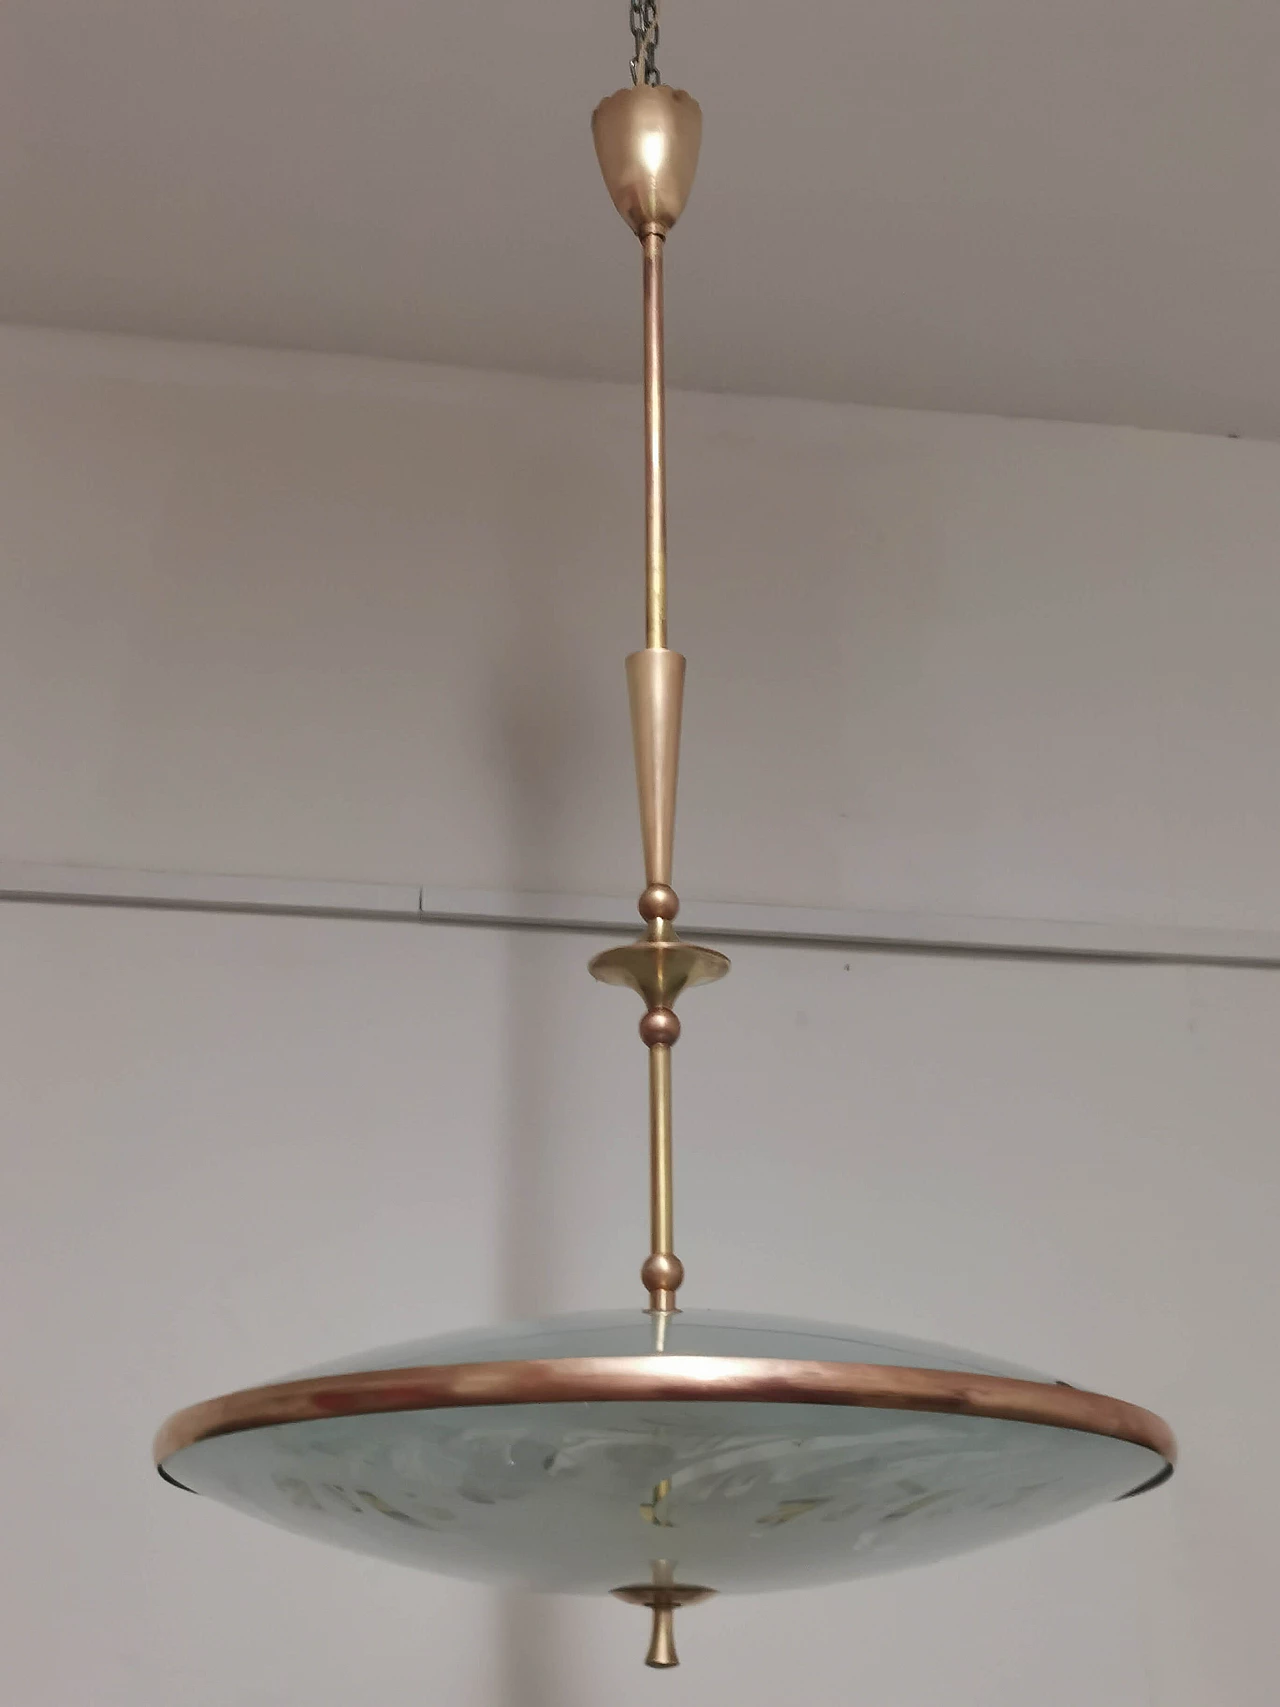 Suspension lamp by Pietro Chiesa for Fontana Arte, 1940s 1372283